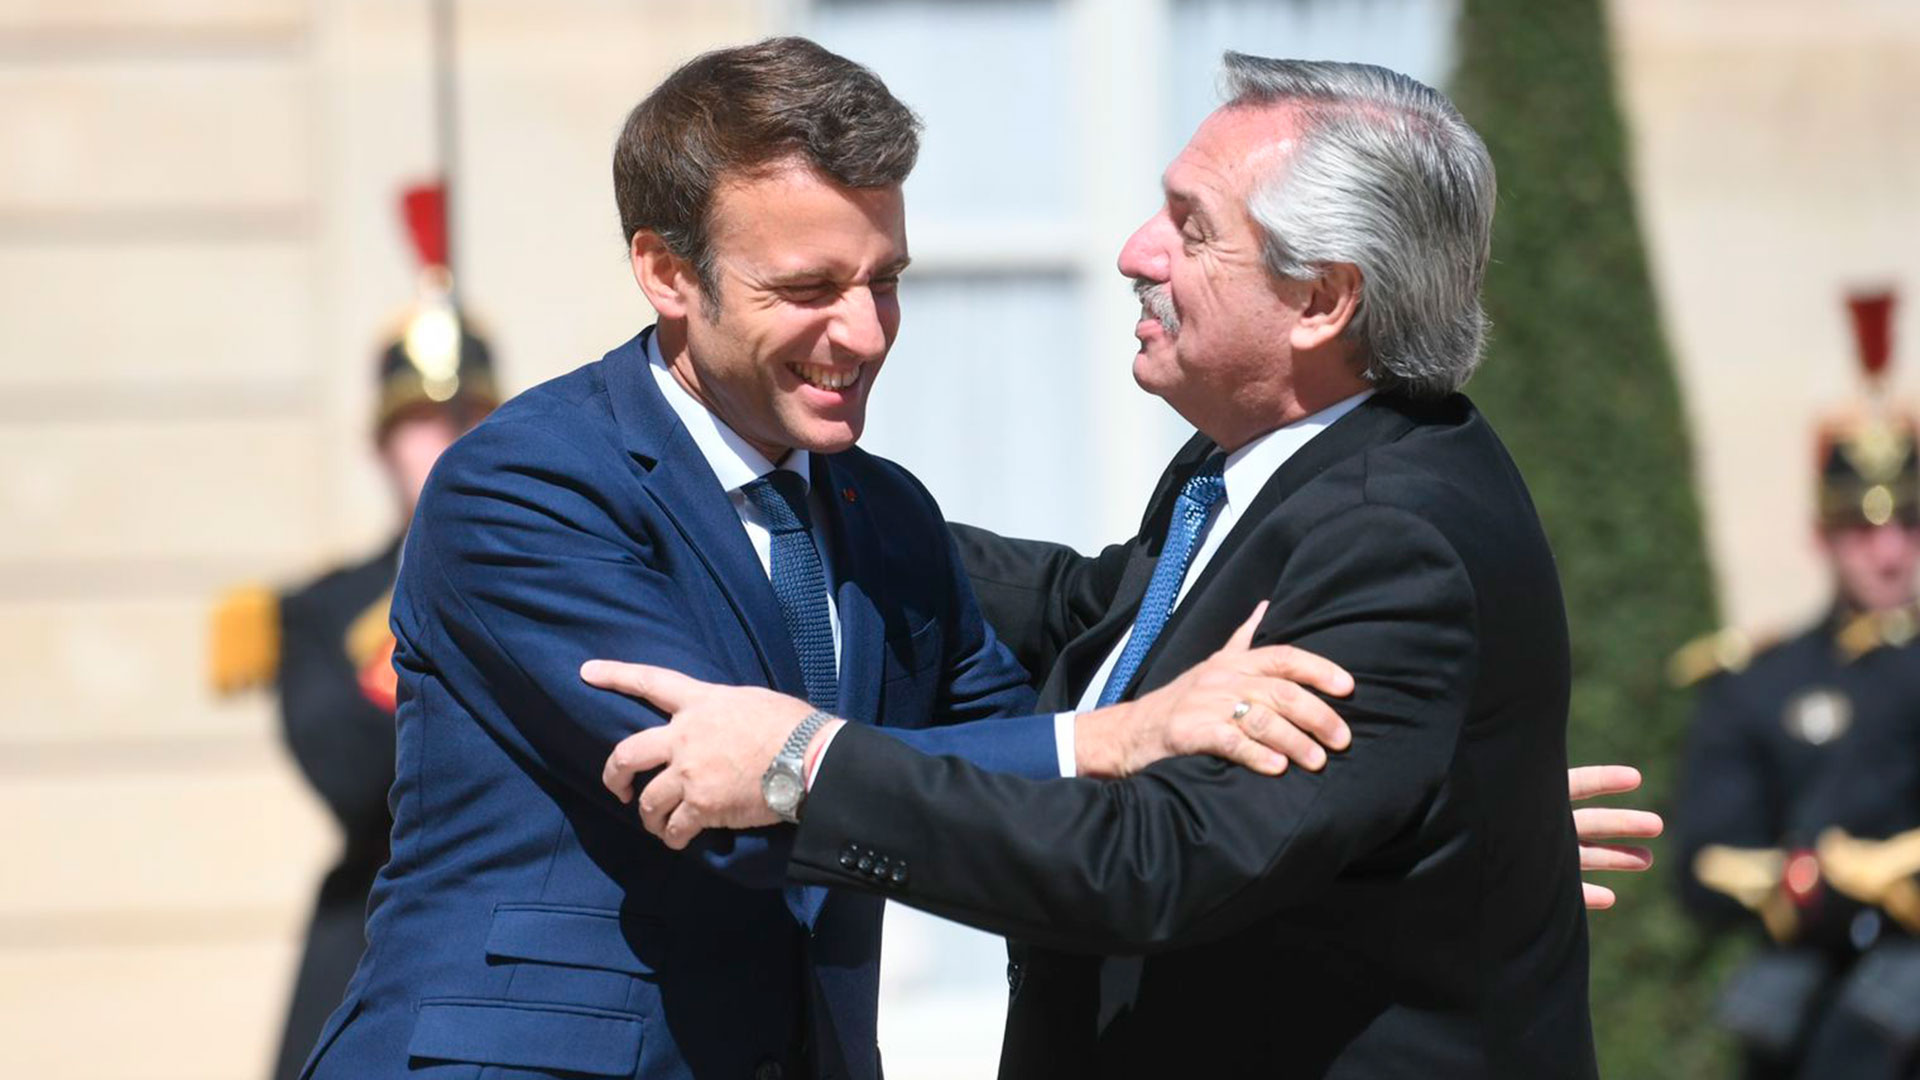 Fernández received important support from the President of France, Emmanuel Macron